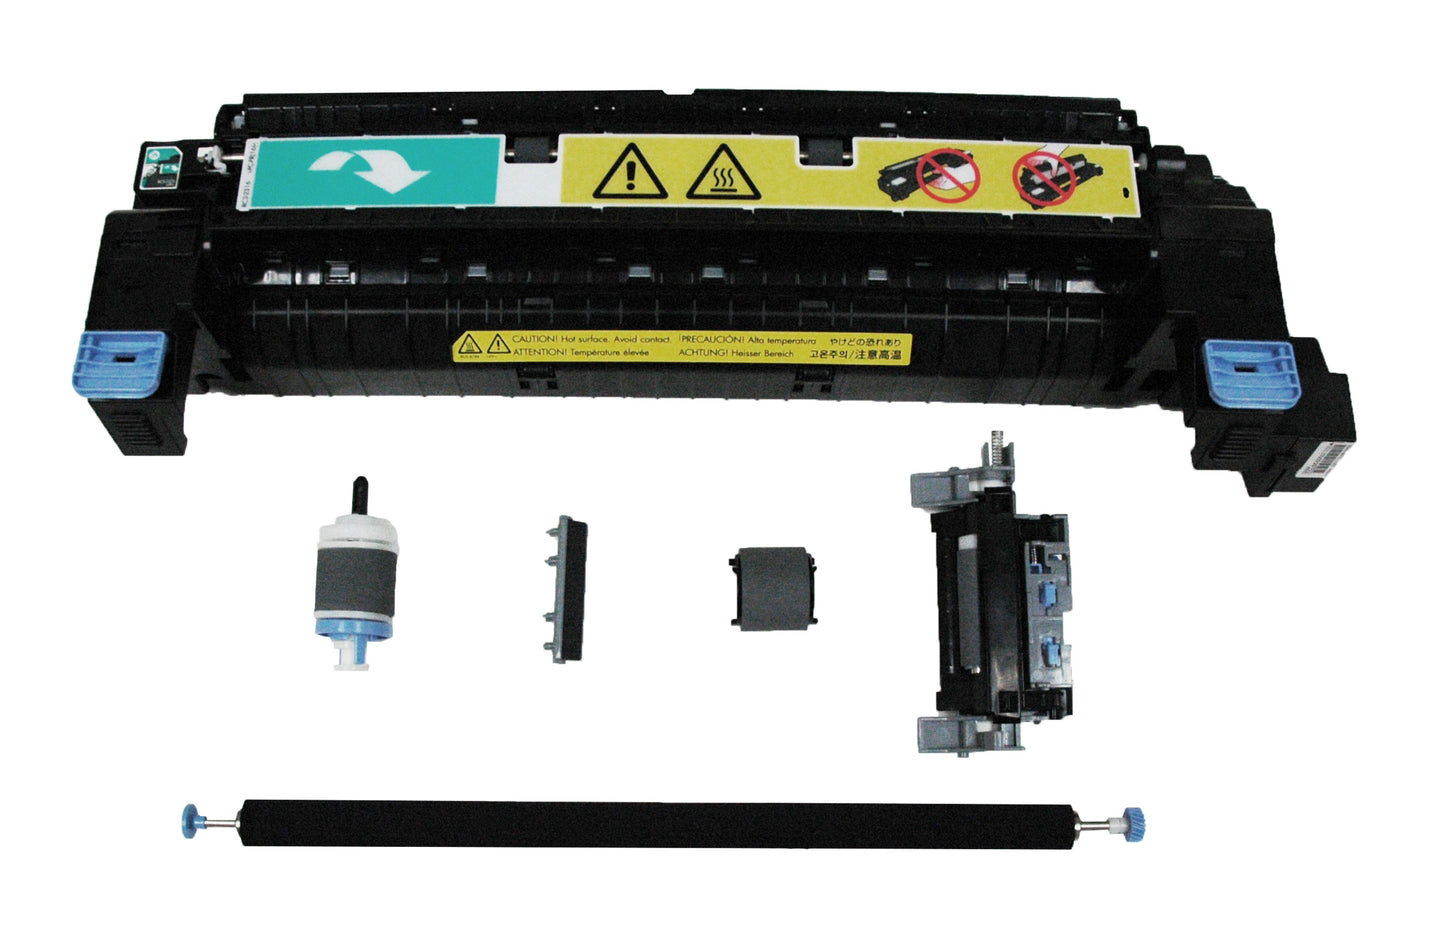 HP M775 Remanufactured Maintenance Kit with OEM Parts